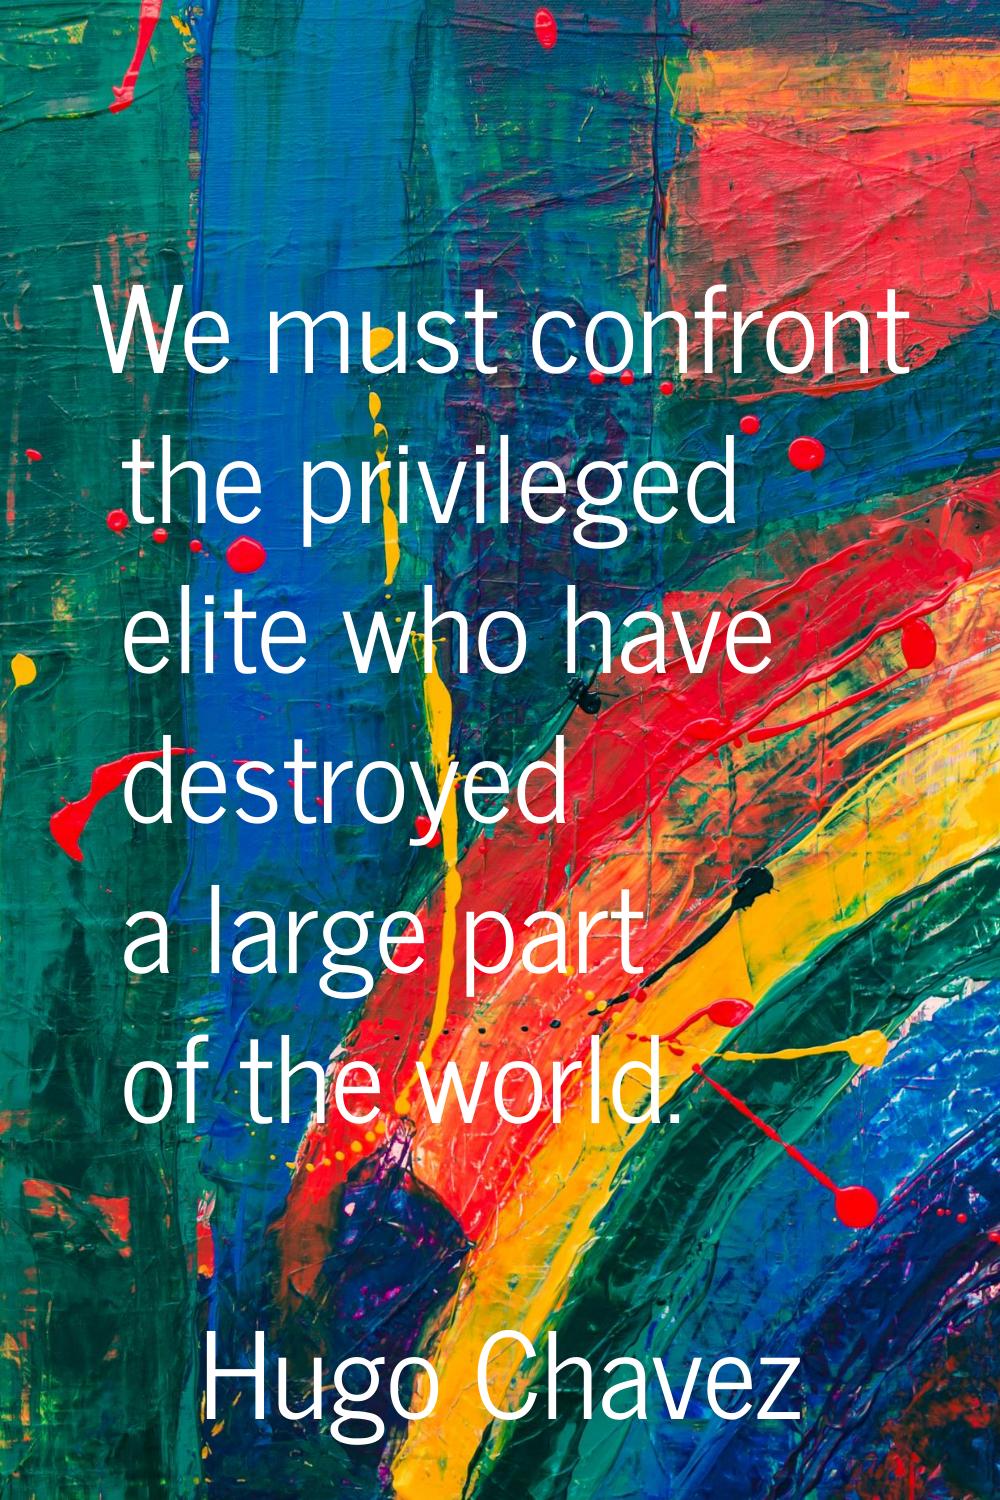 We must confront the privileged elite who have destroyed a large part of the world.